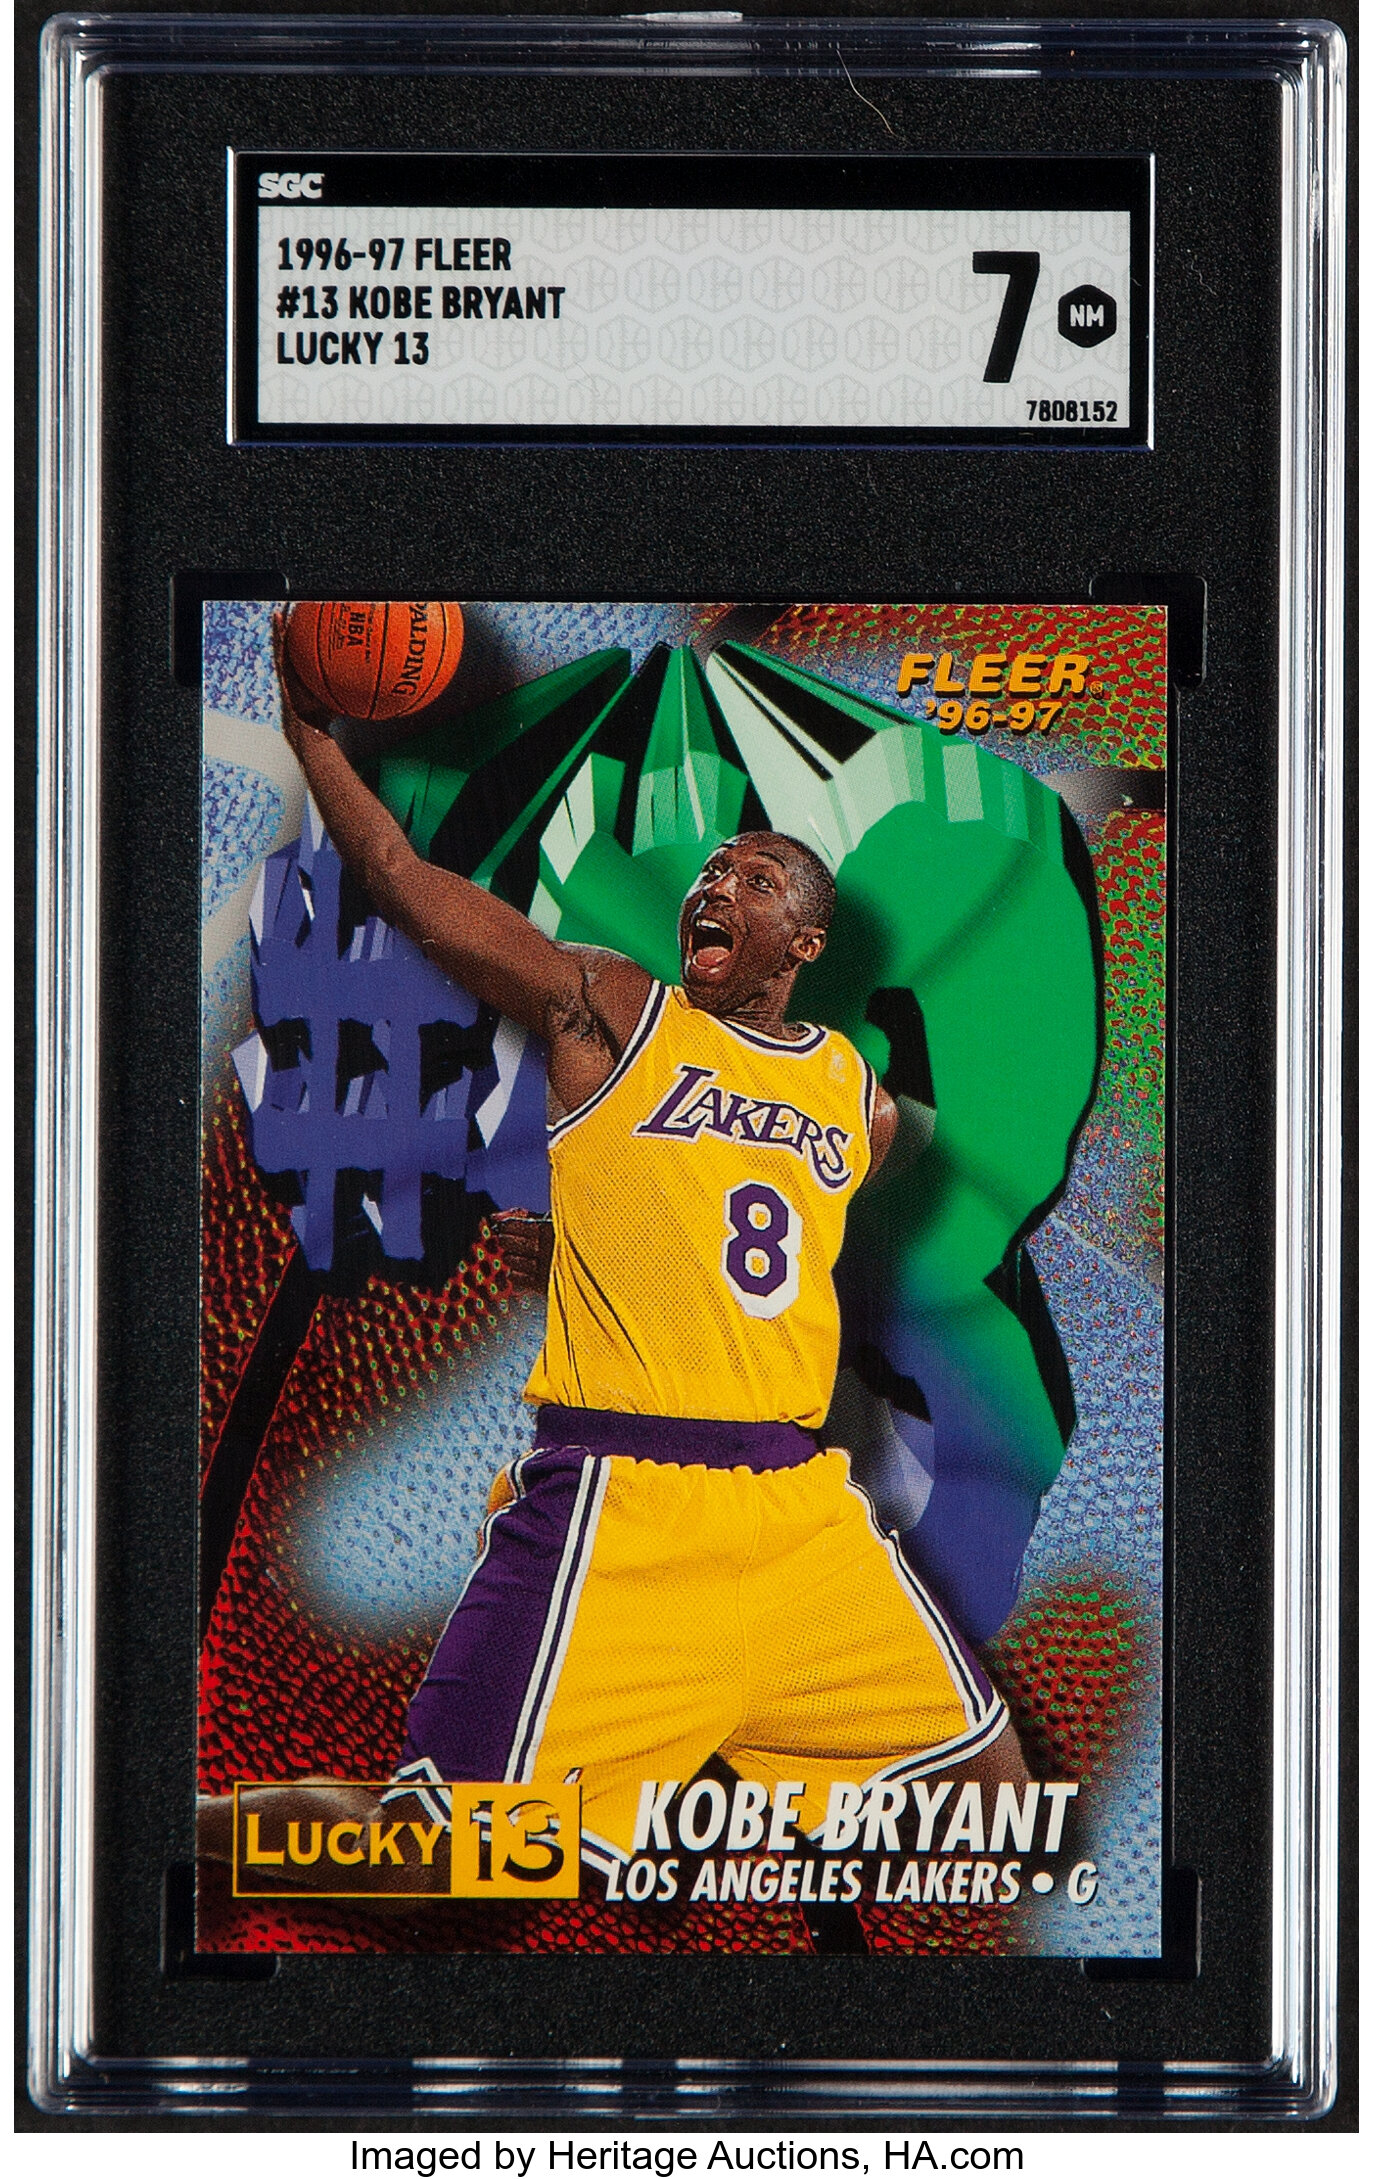 Sold at Auction: (Mint) 1996-97 Upper Deck Collector's Choice Kobe